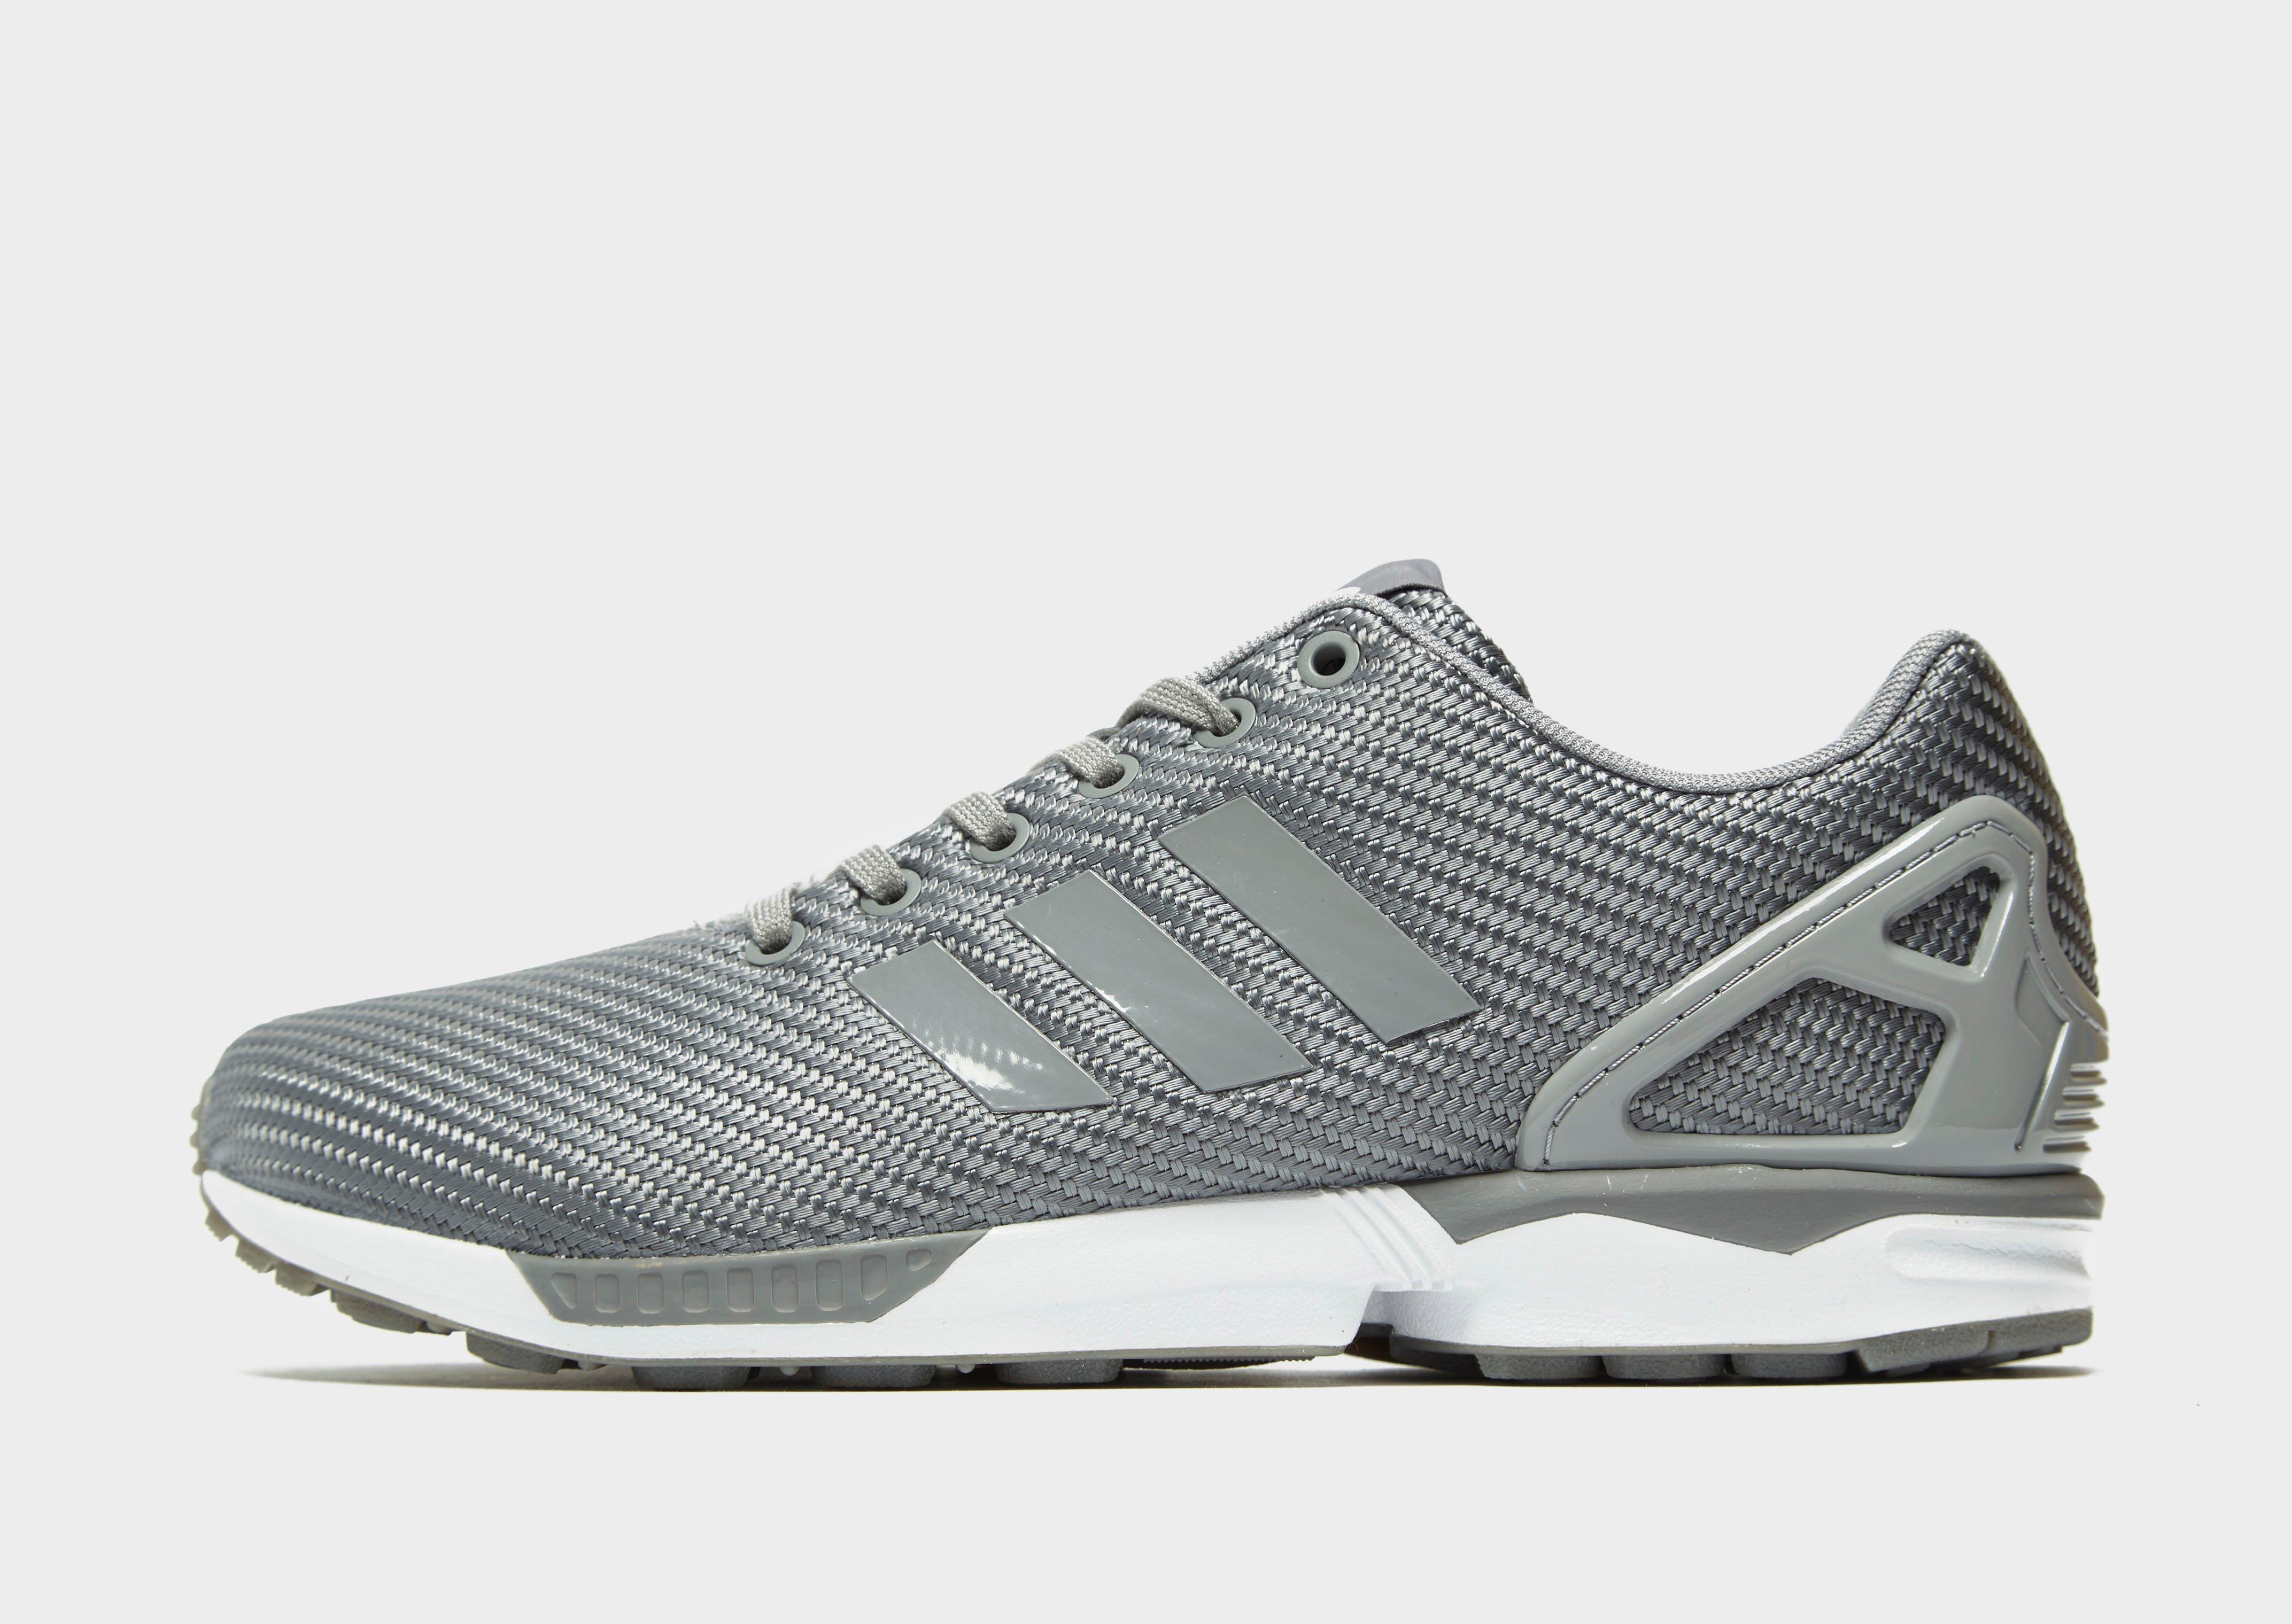 adidas zx flux grey and black